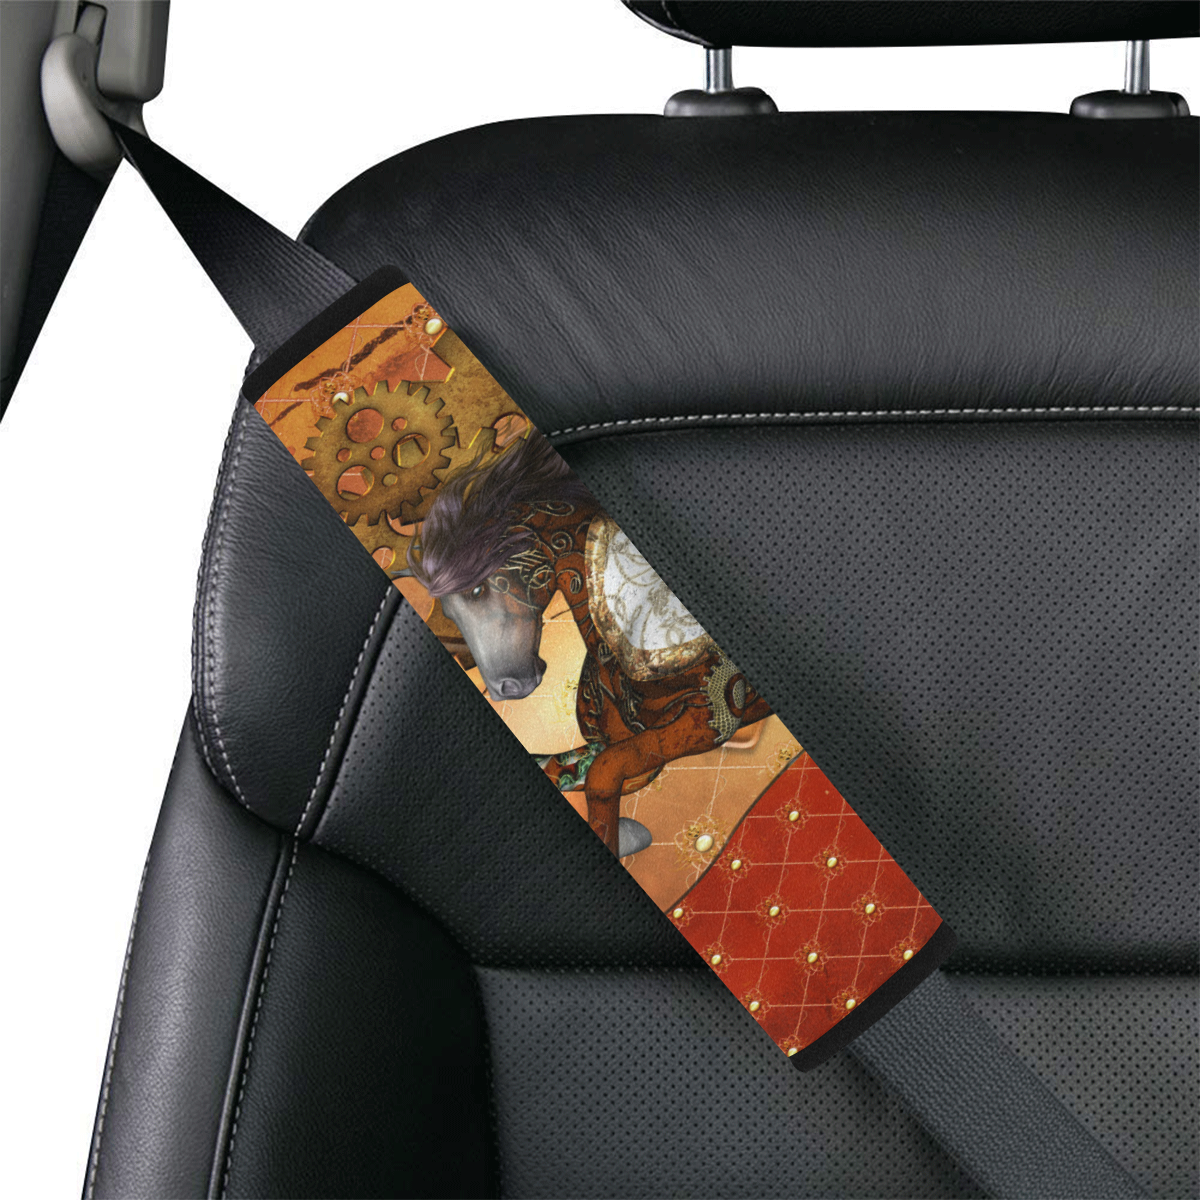 Steampunk, awesome steampunk horse Car Seat Belt Cover 7''x12.6''